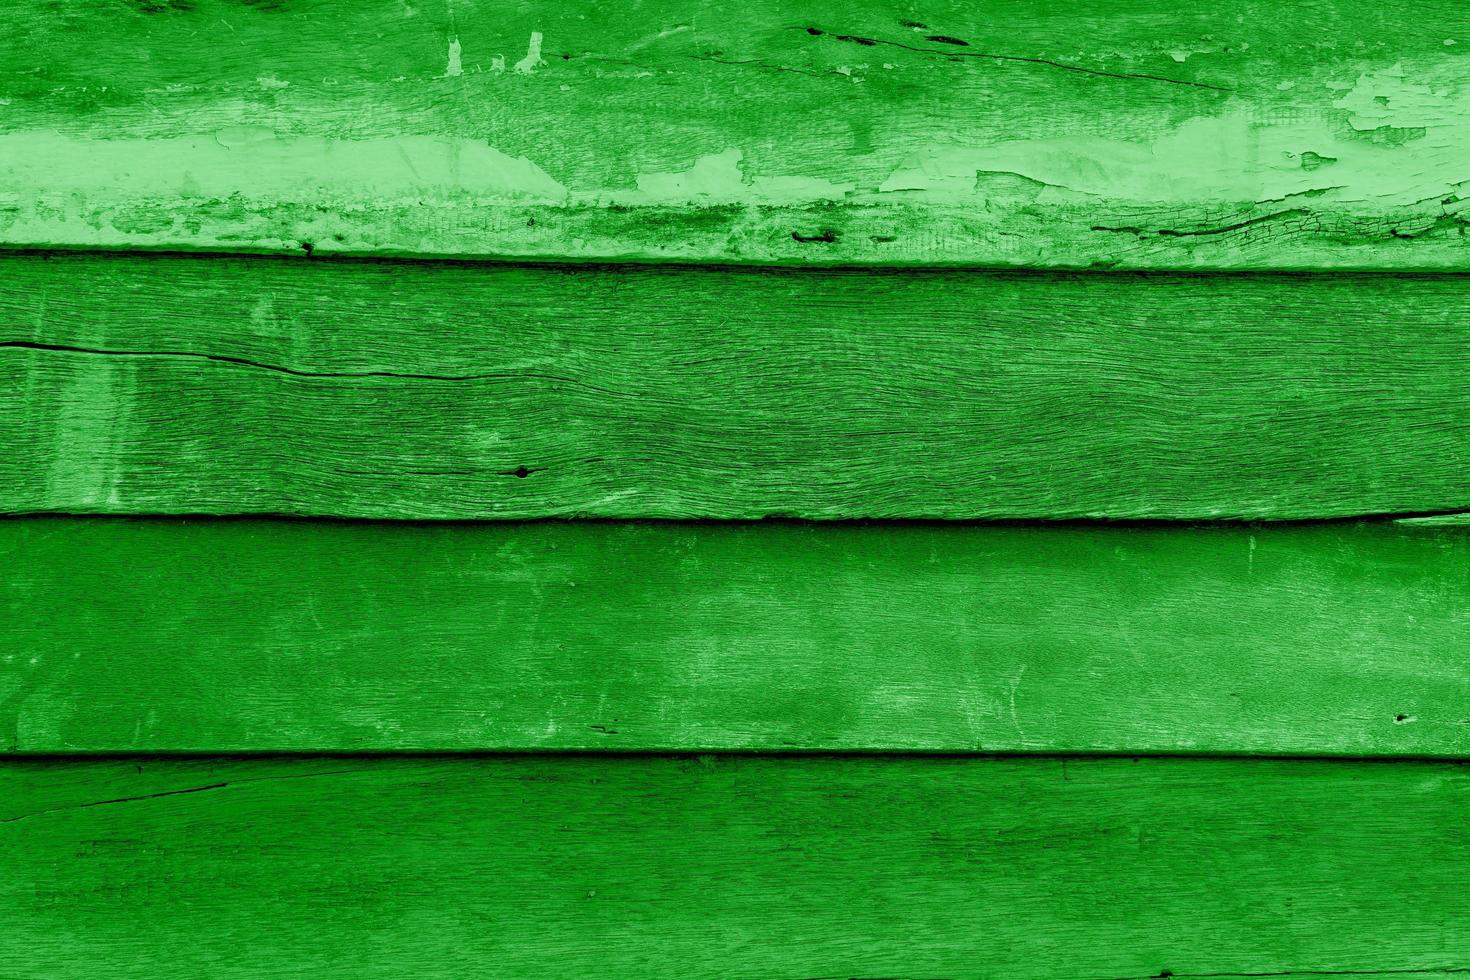 green wood plank texture,abstract background, ideas graphic design for web design or banner photo